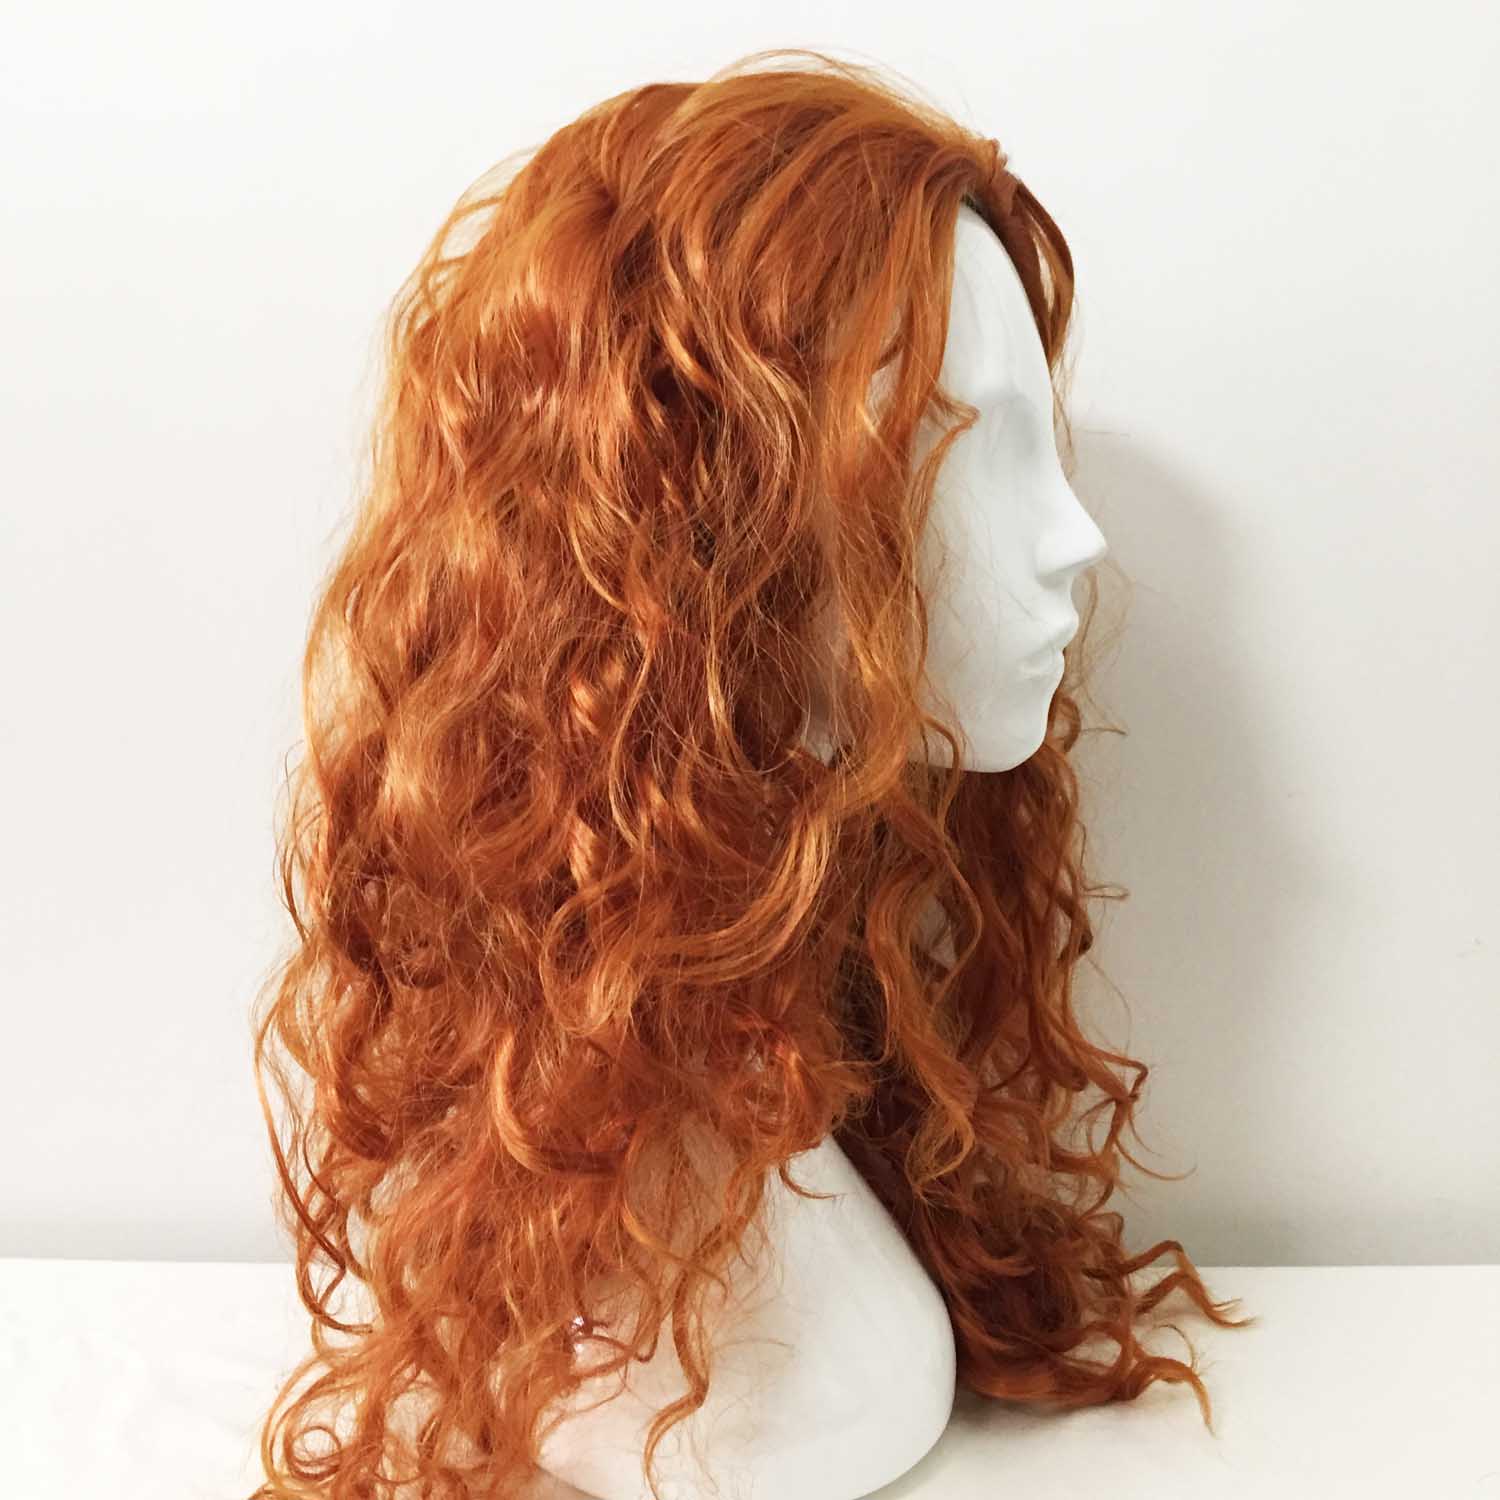 nevermindyrhead Women Ginger Brown Long Curly Slicked Back Cosplay Wig